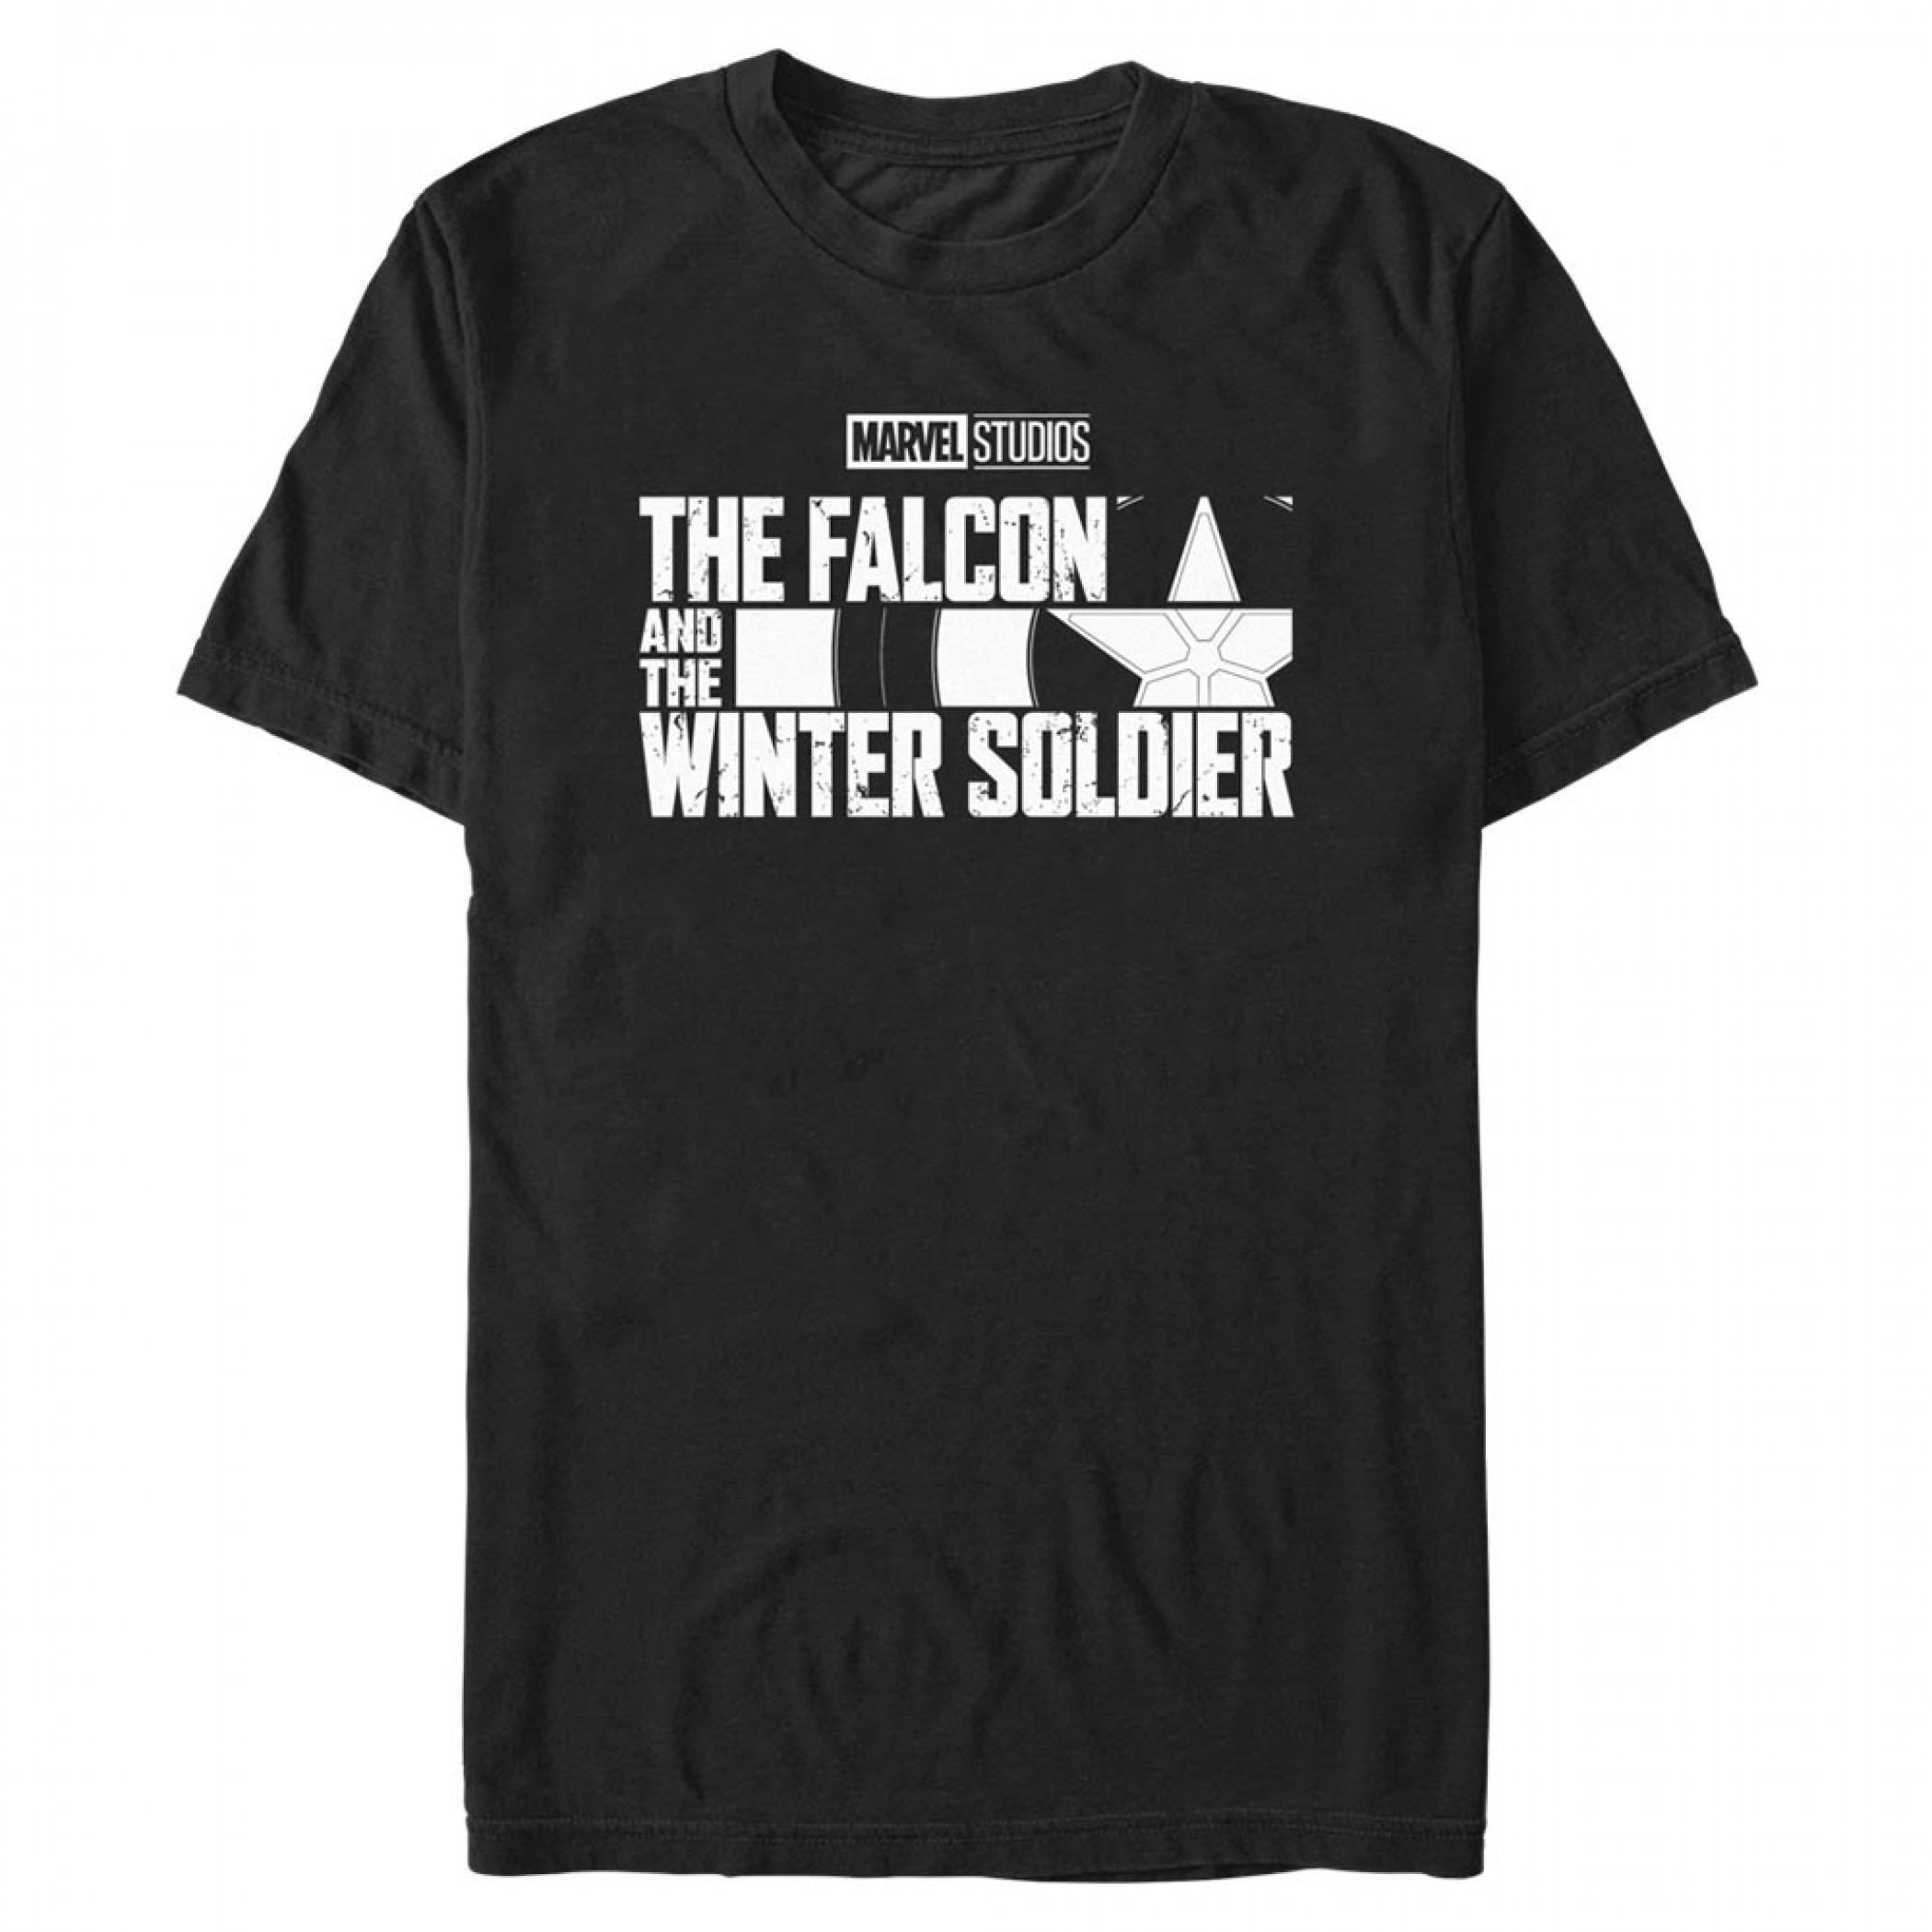 The Falcon and The Winter Soldier Black and White Logo T-Shirt